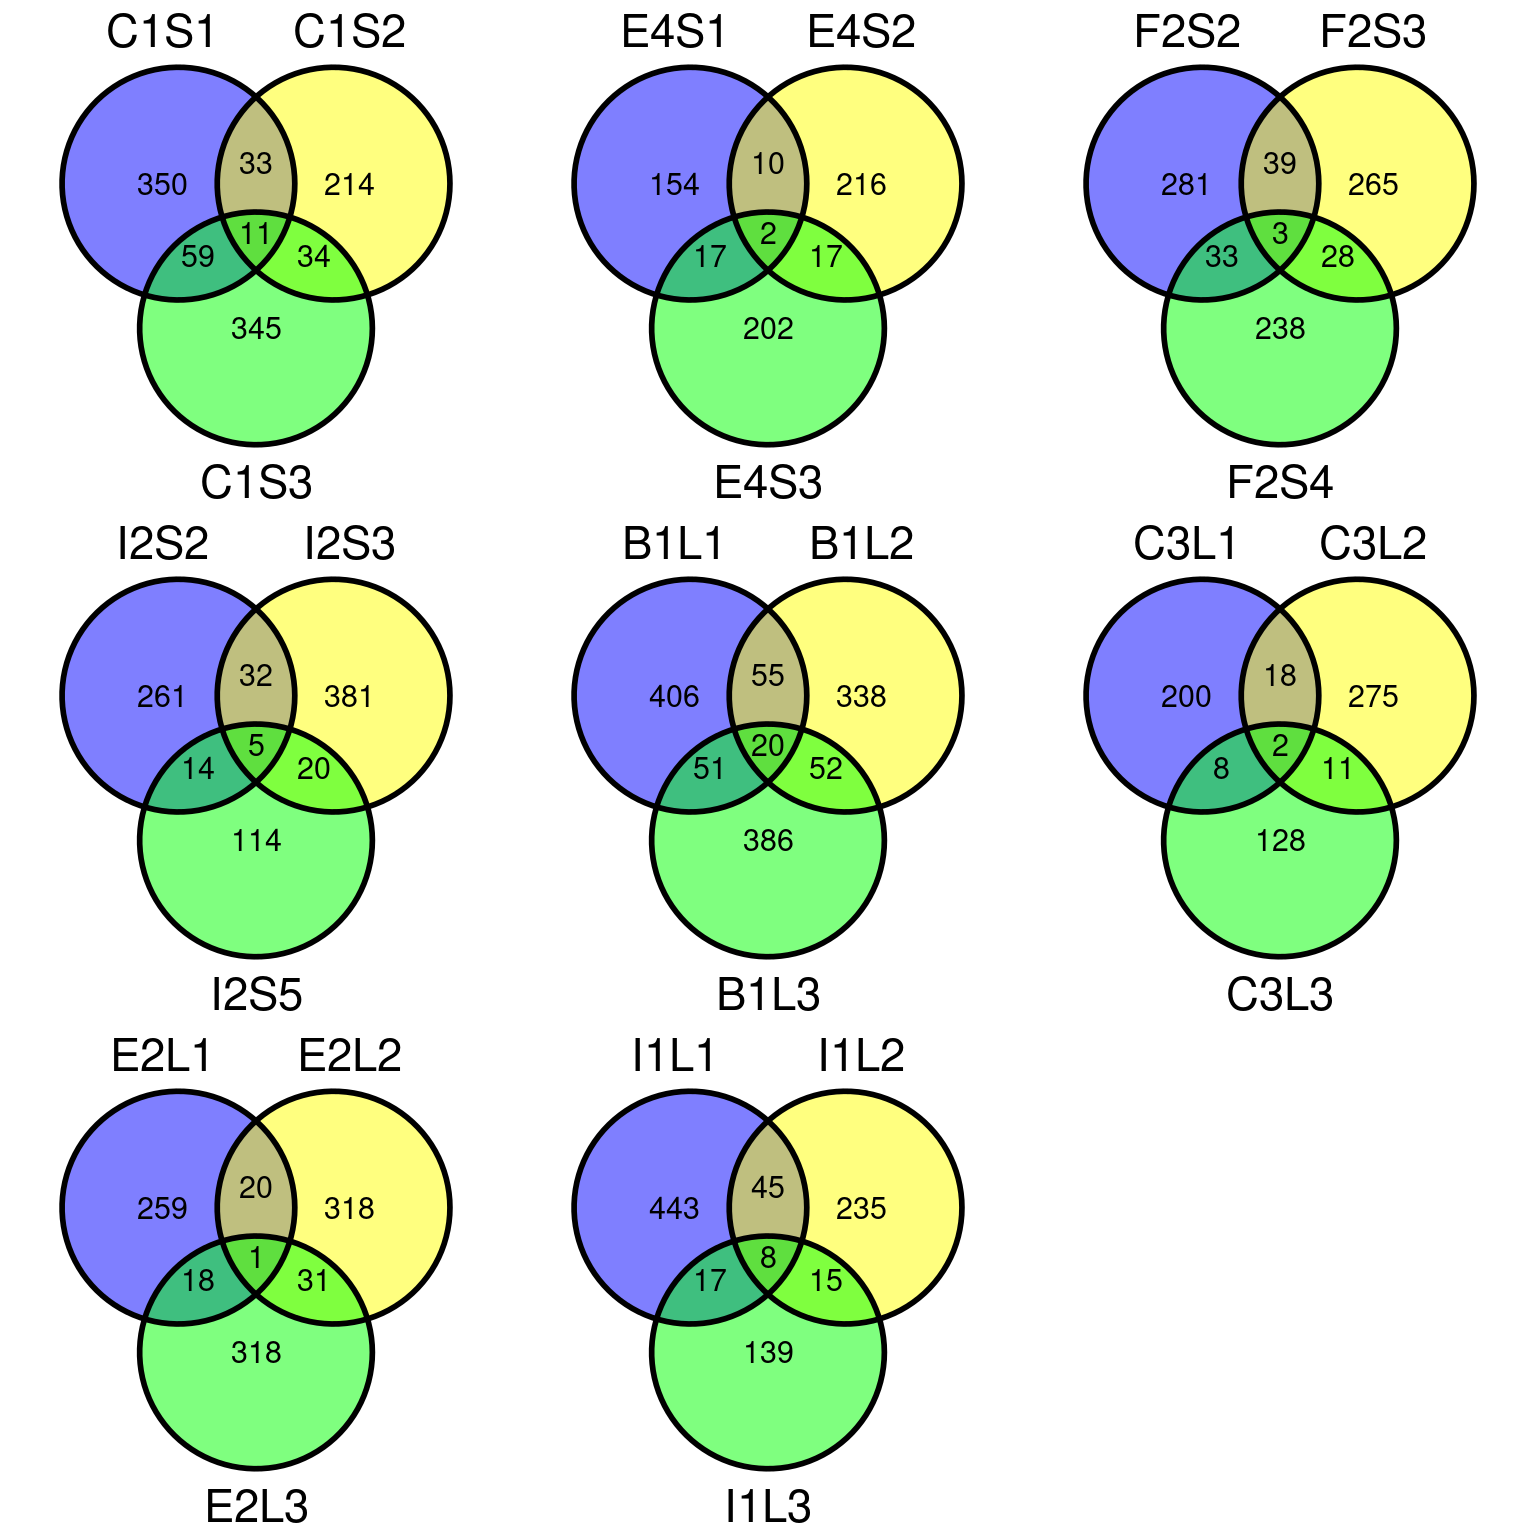 Filtered mutations sharing across leaf samples within tips for base filtering.